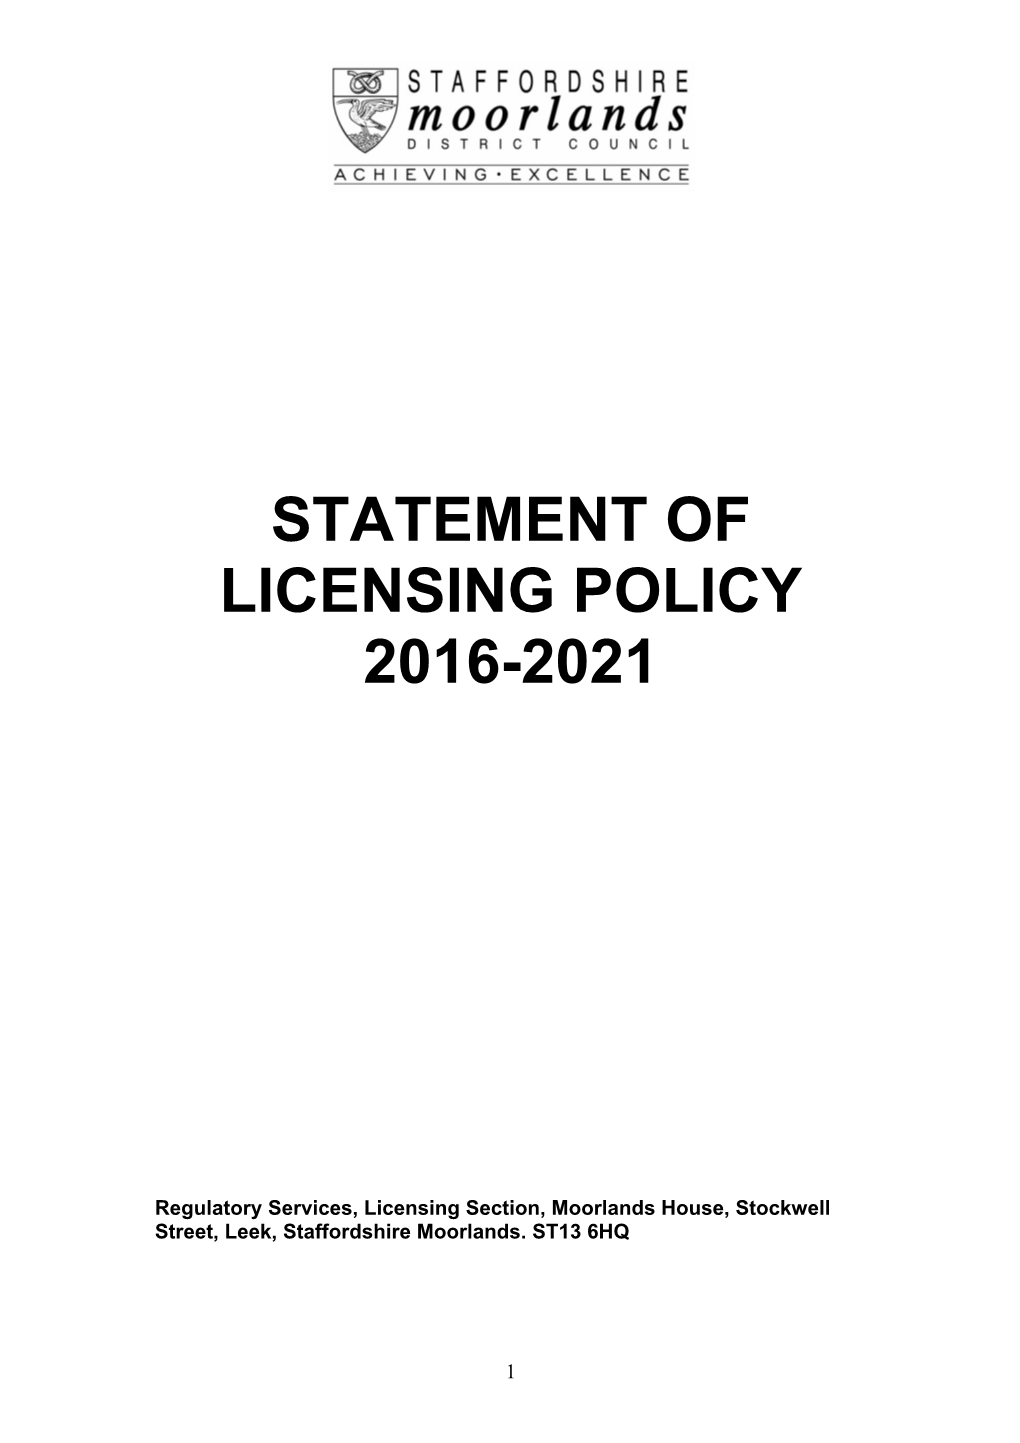 Statement of Licensing Policy 2016-2021